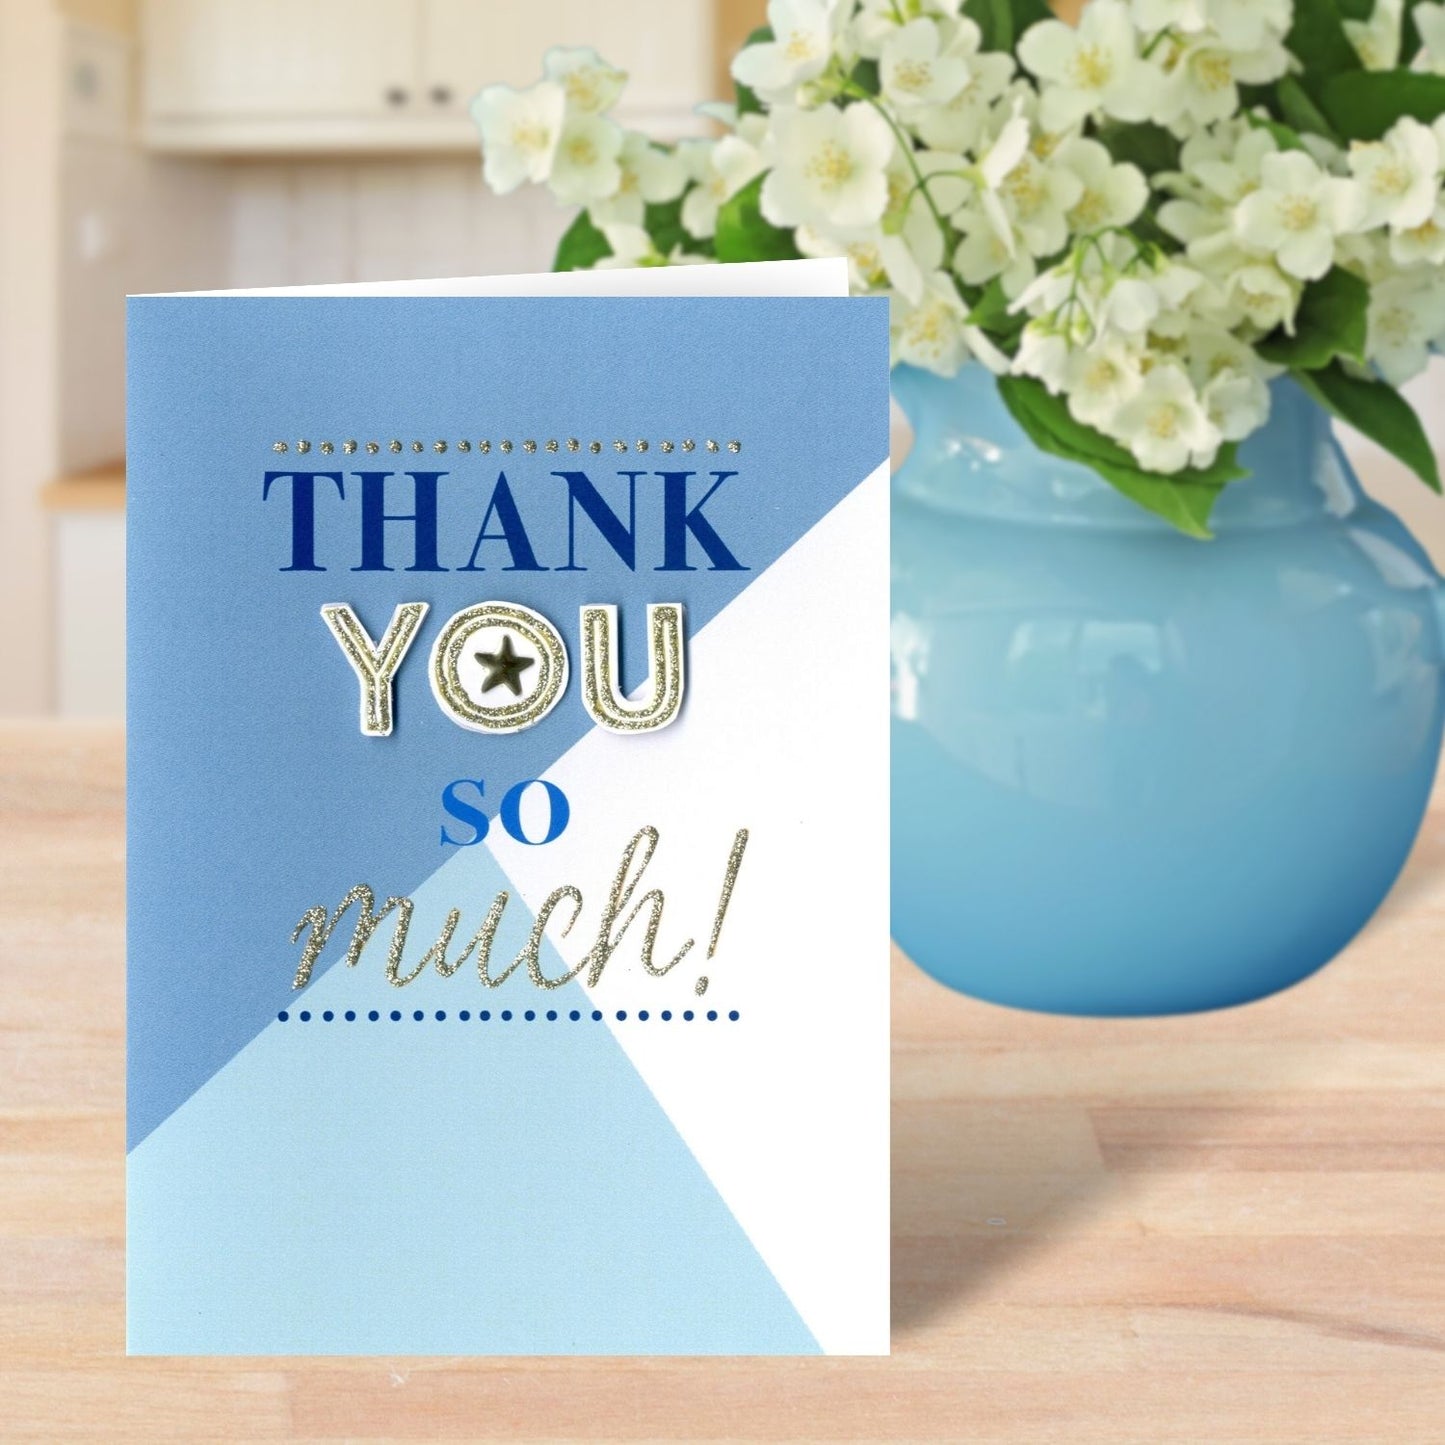 Thank You So Much Greeting Card